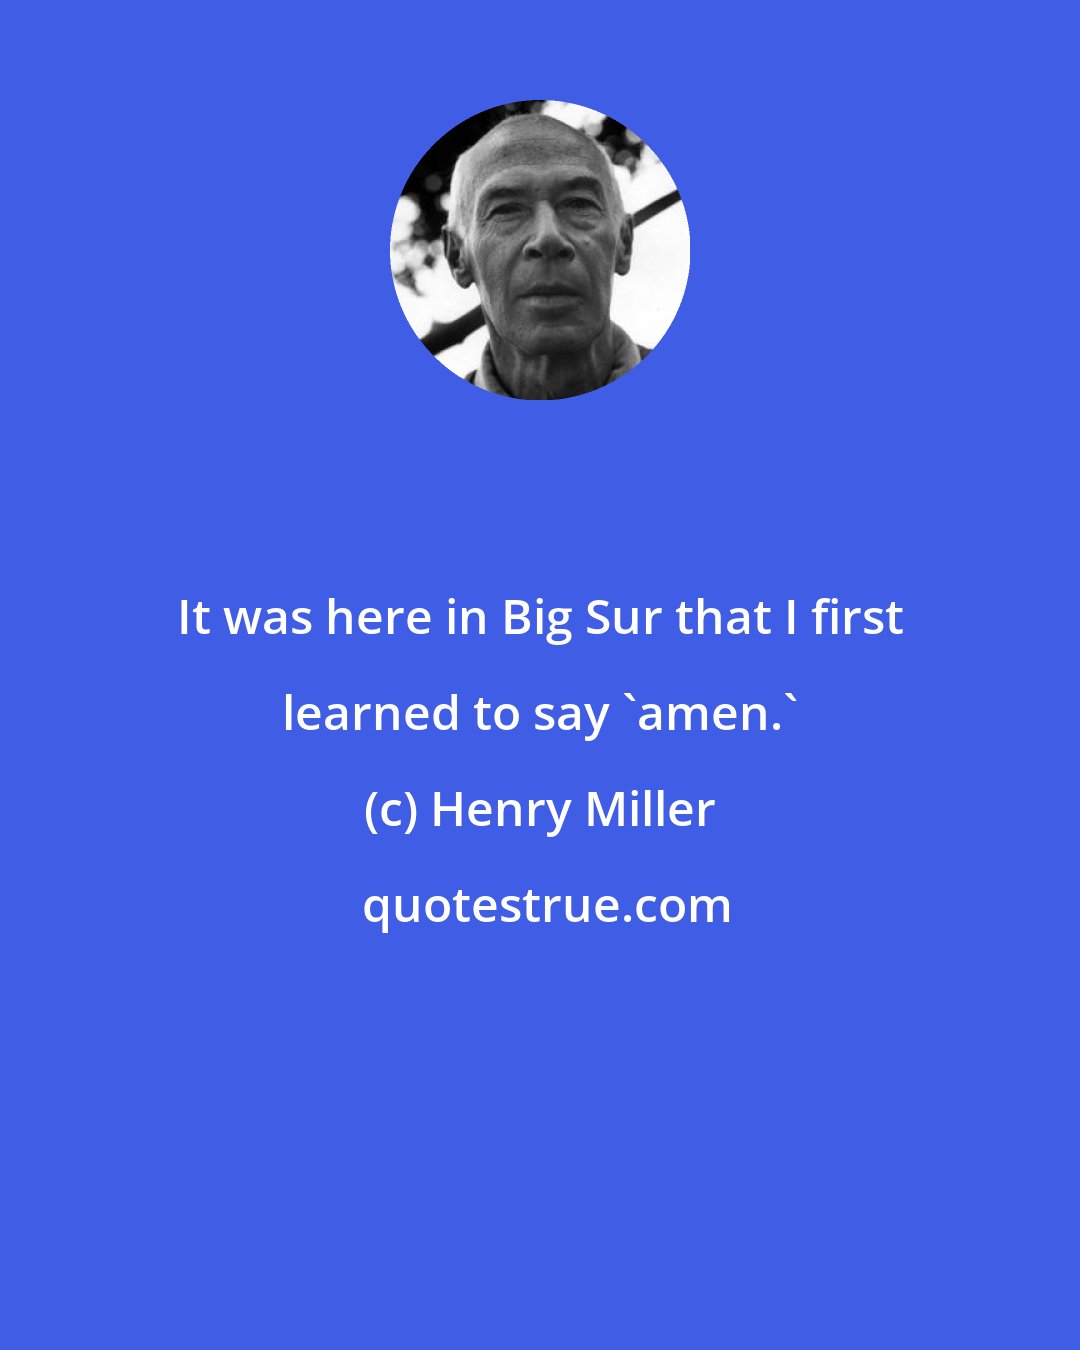 Henry Miller: It was here in Big Sur that I first learned to say 'amen.'